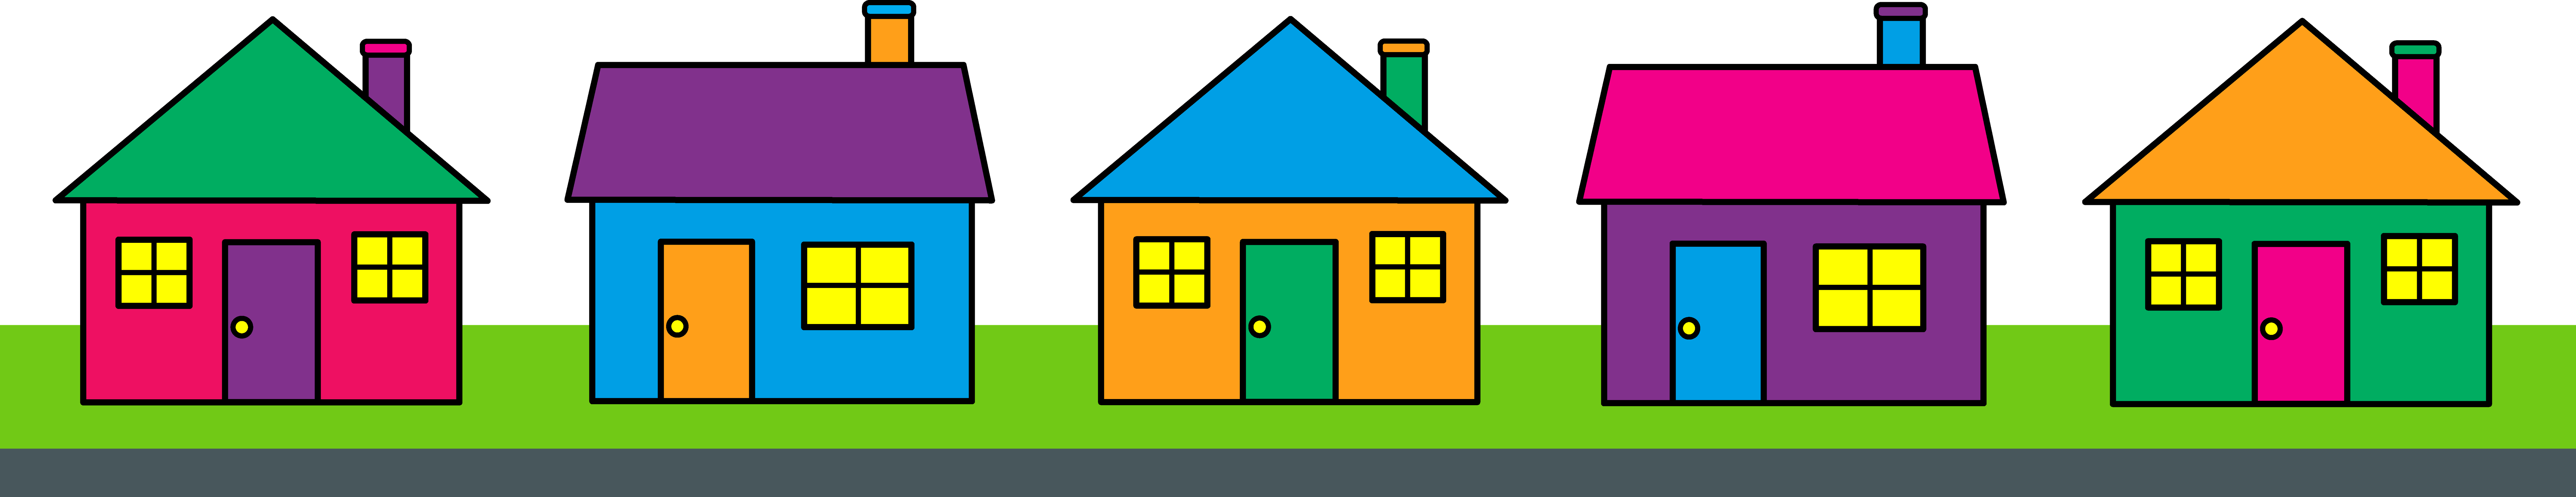 Drawing a House 1 | ClipArt ETC